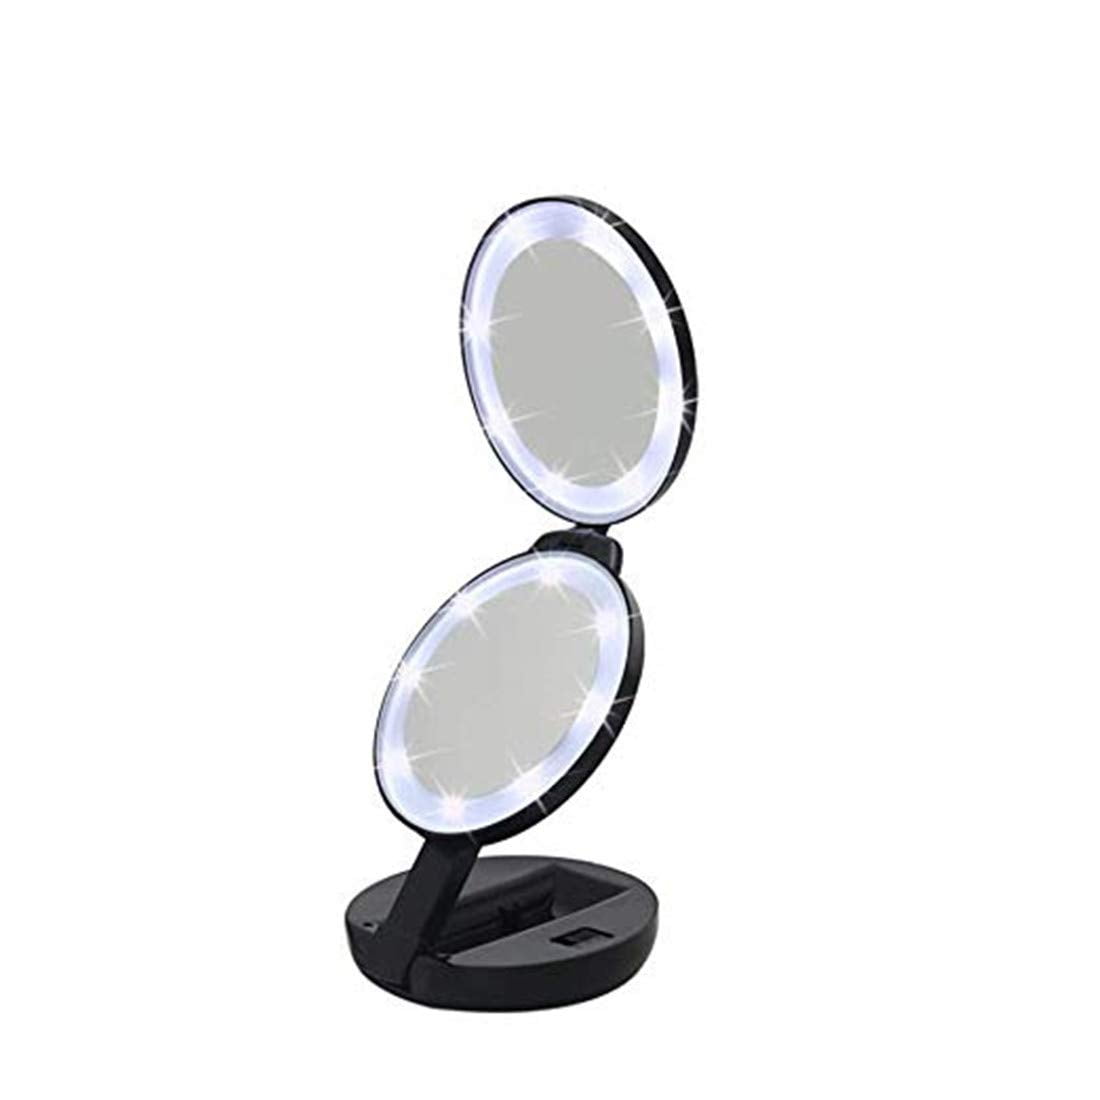 1X/5X Magnifying Double Sided LED Lighted Makeup Mirror